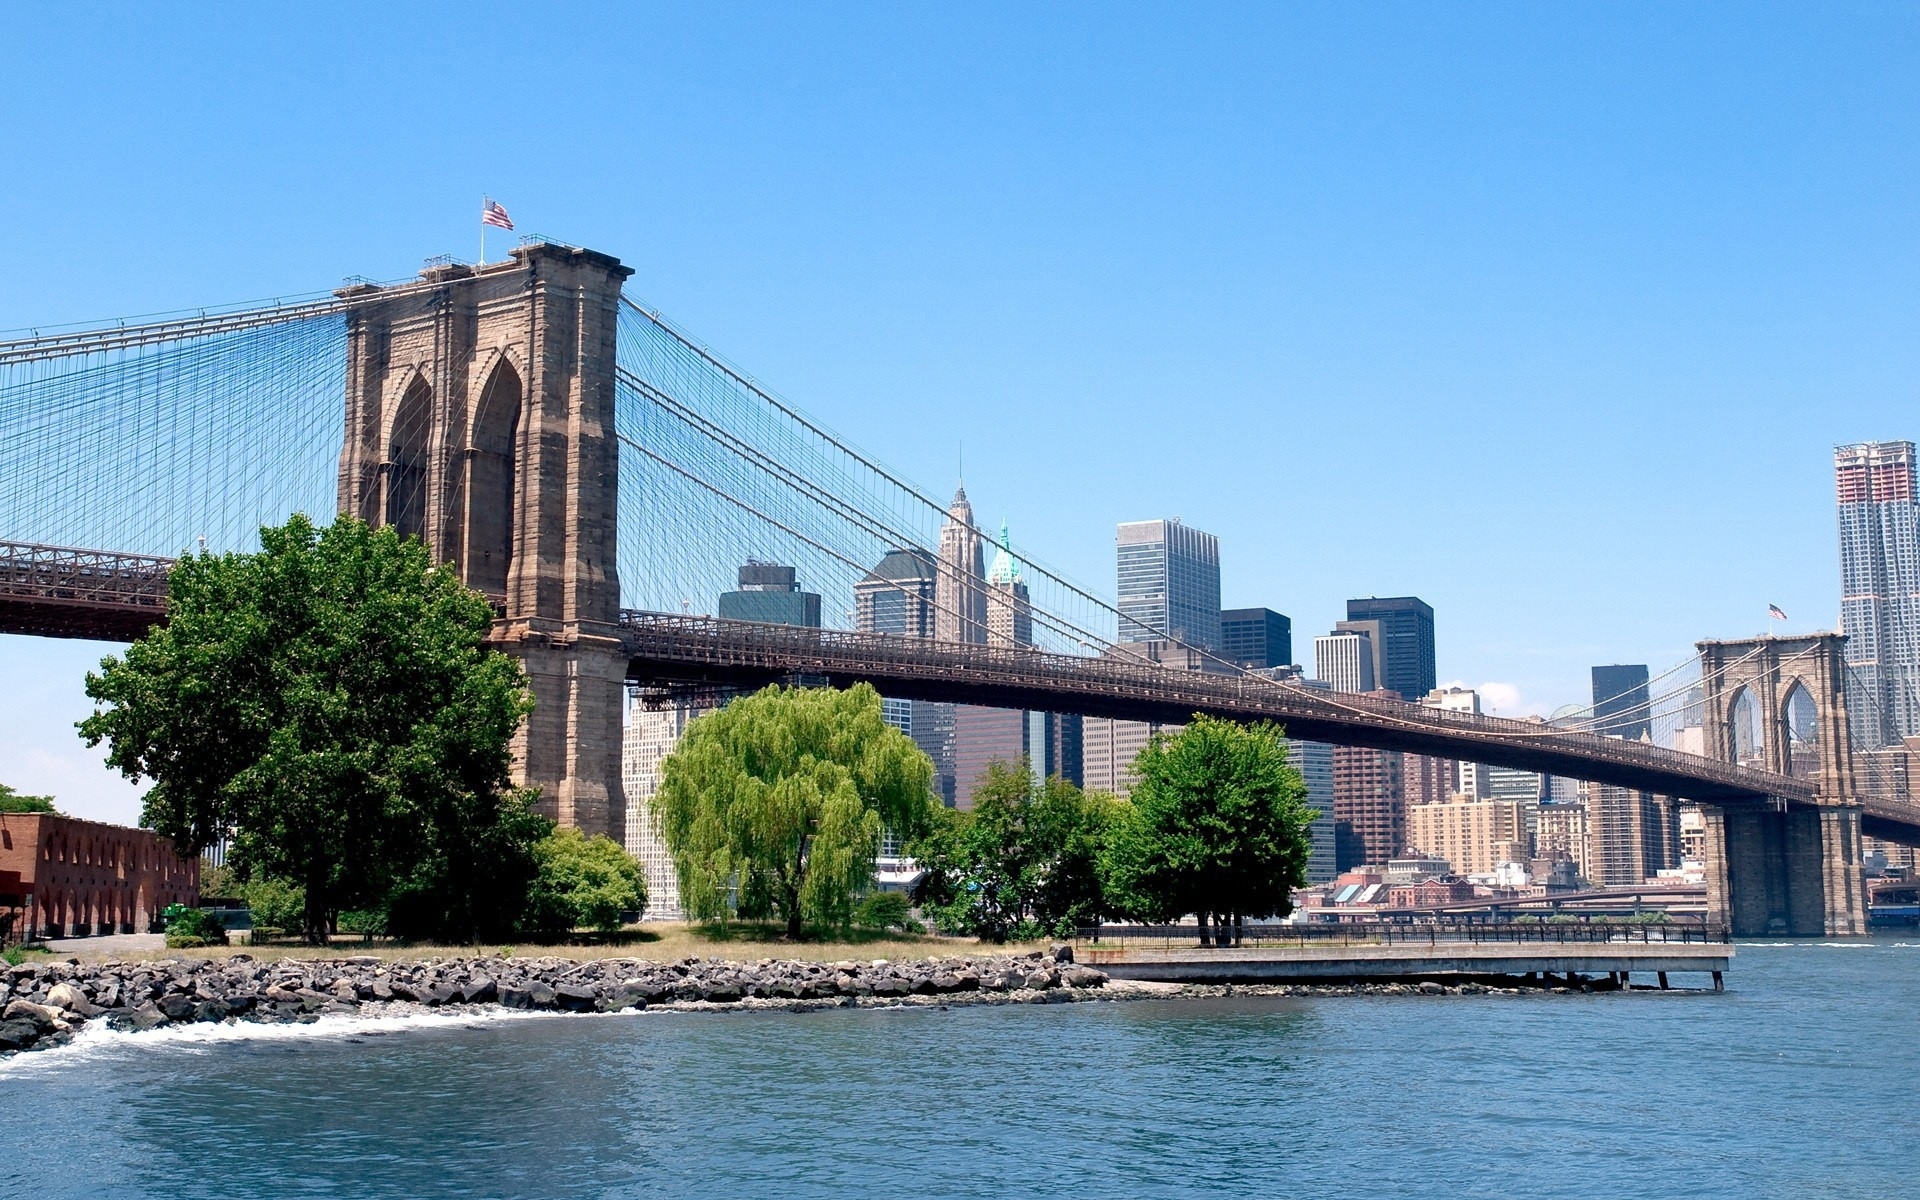 Brooklyn Bridge New Background HD Wallpapers HD Wallapers for Free